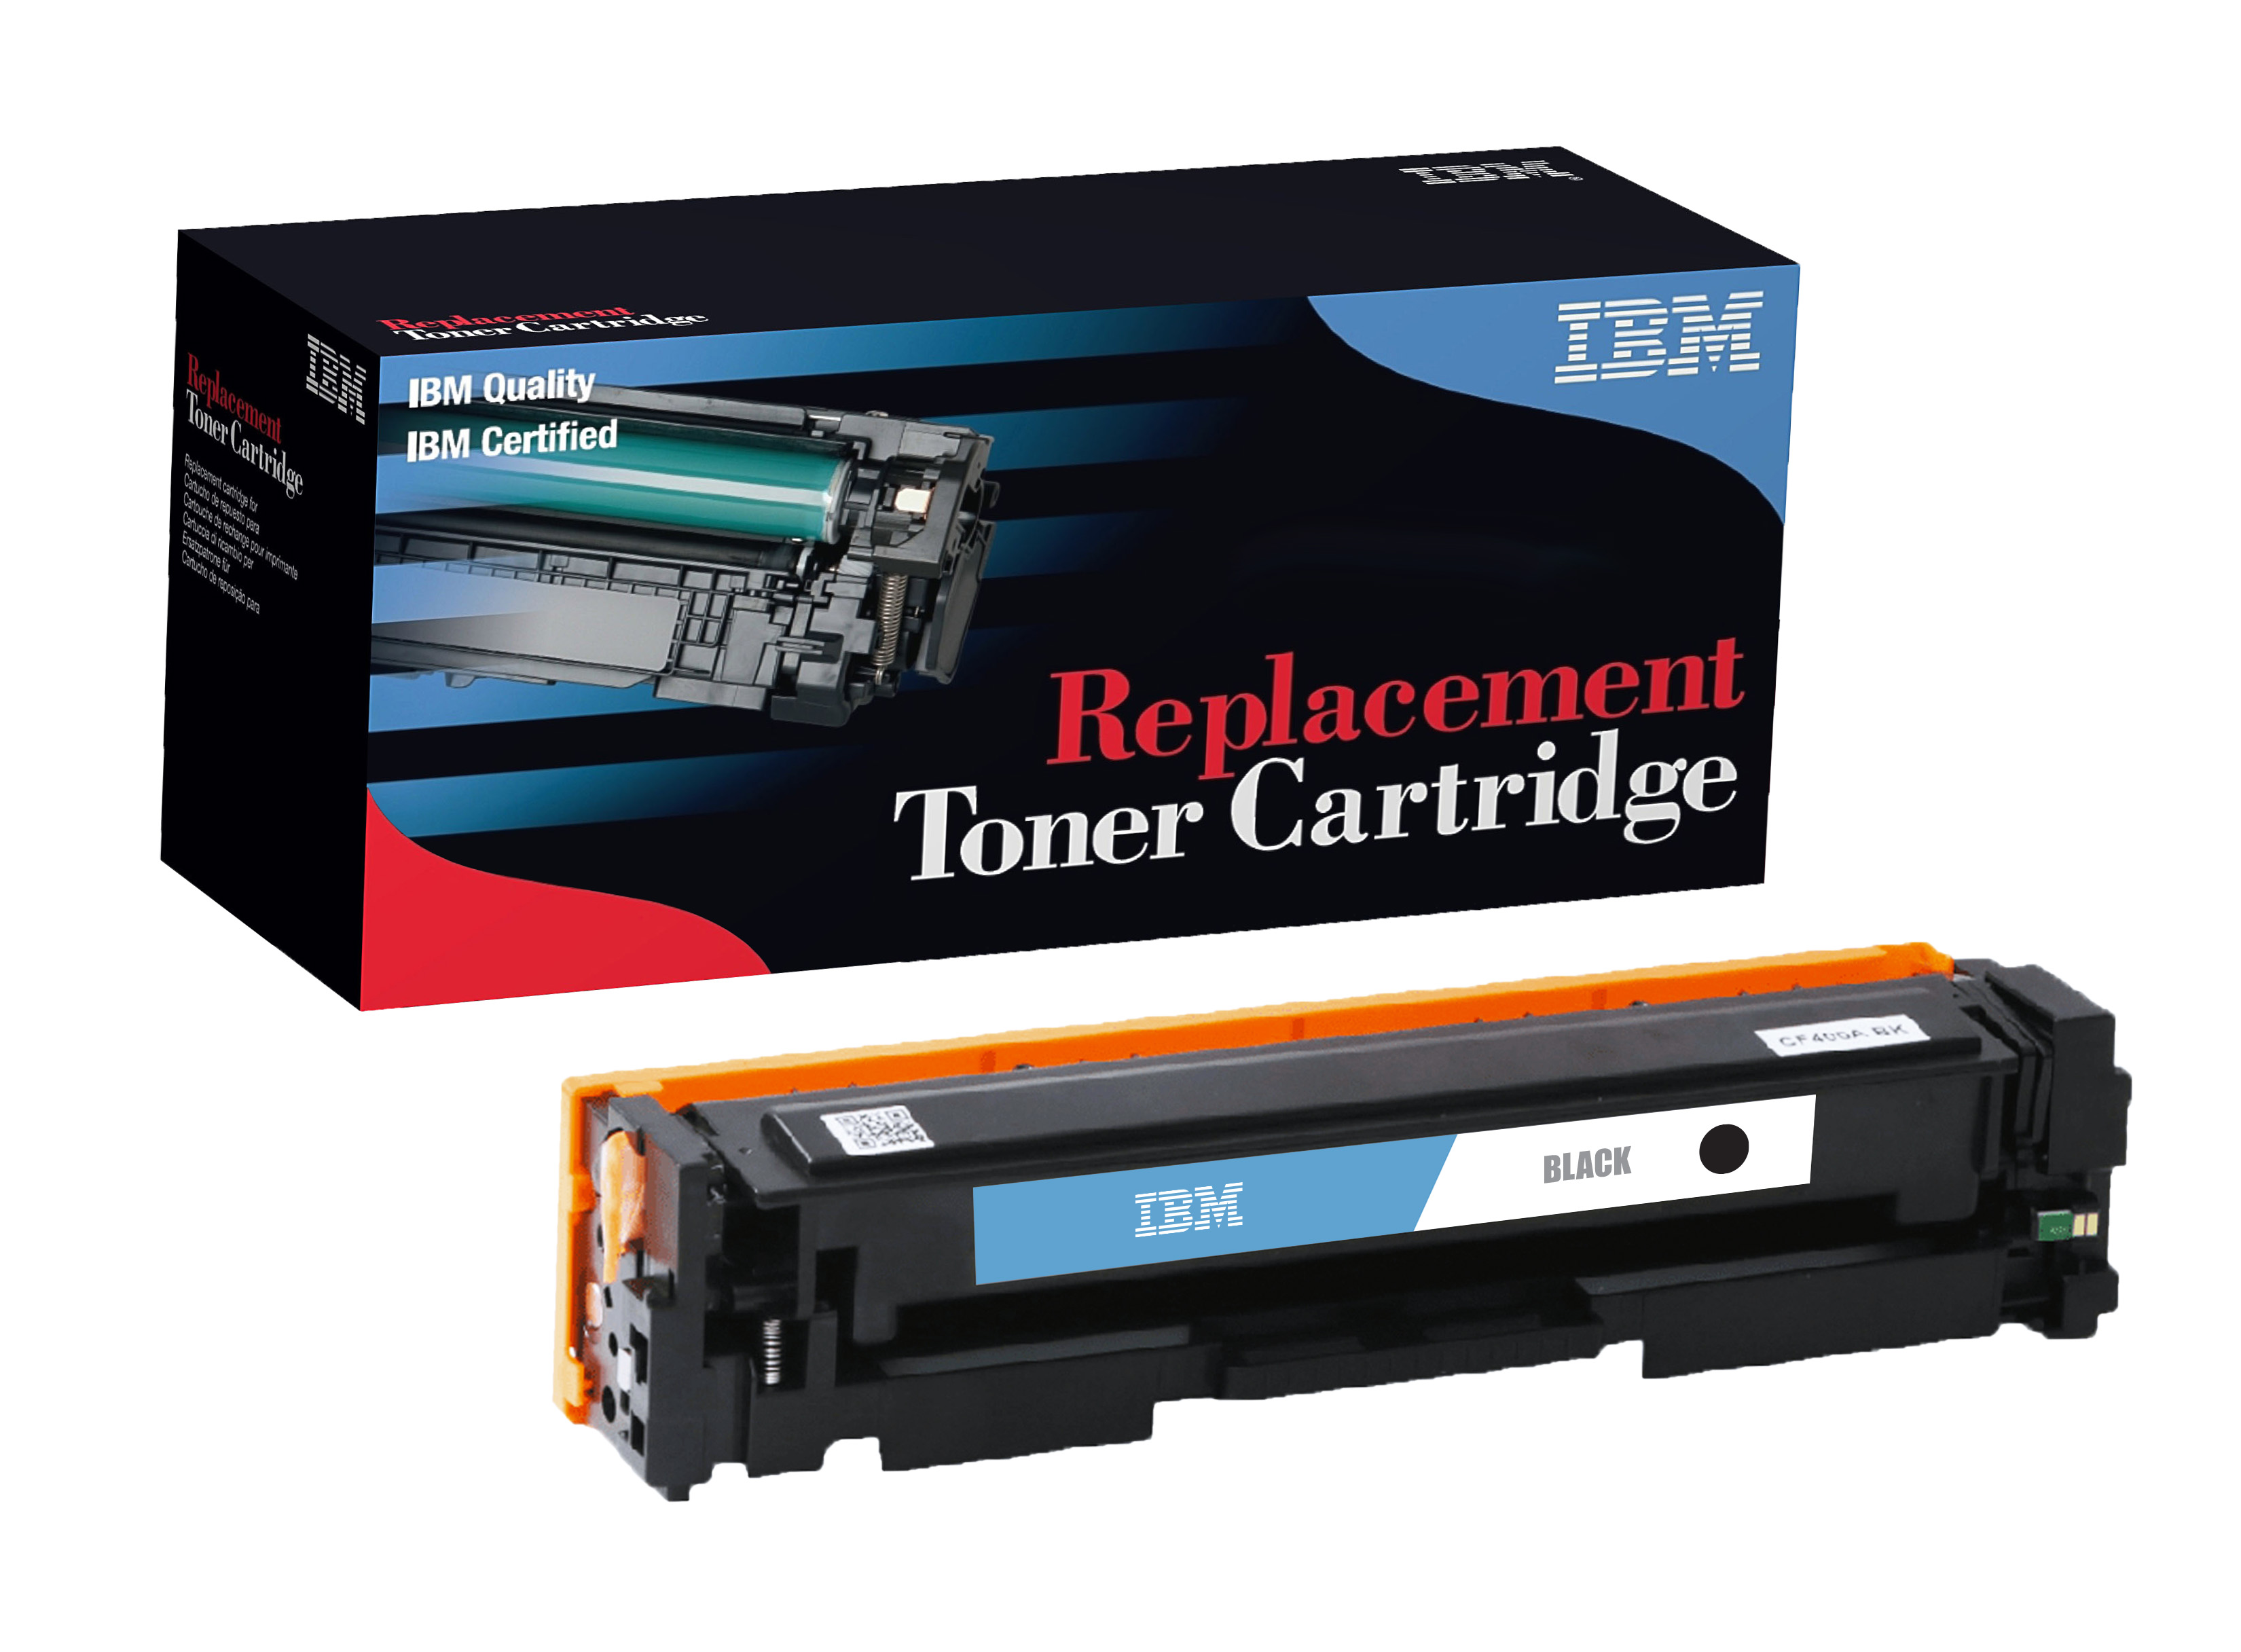 IBM Replacement Black Toner Cartridge for Color PRO 200 M251nw/ M276nw MFP